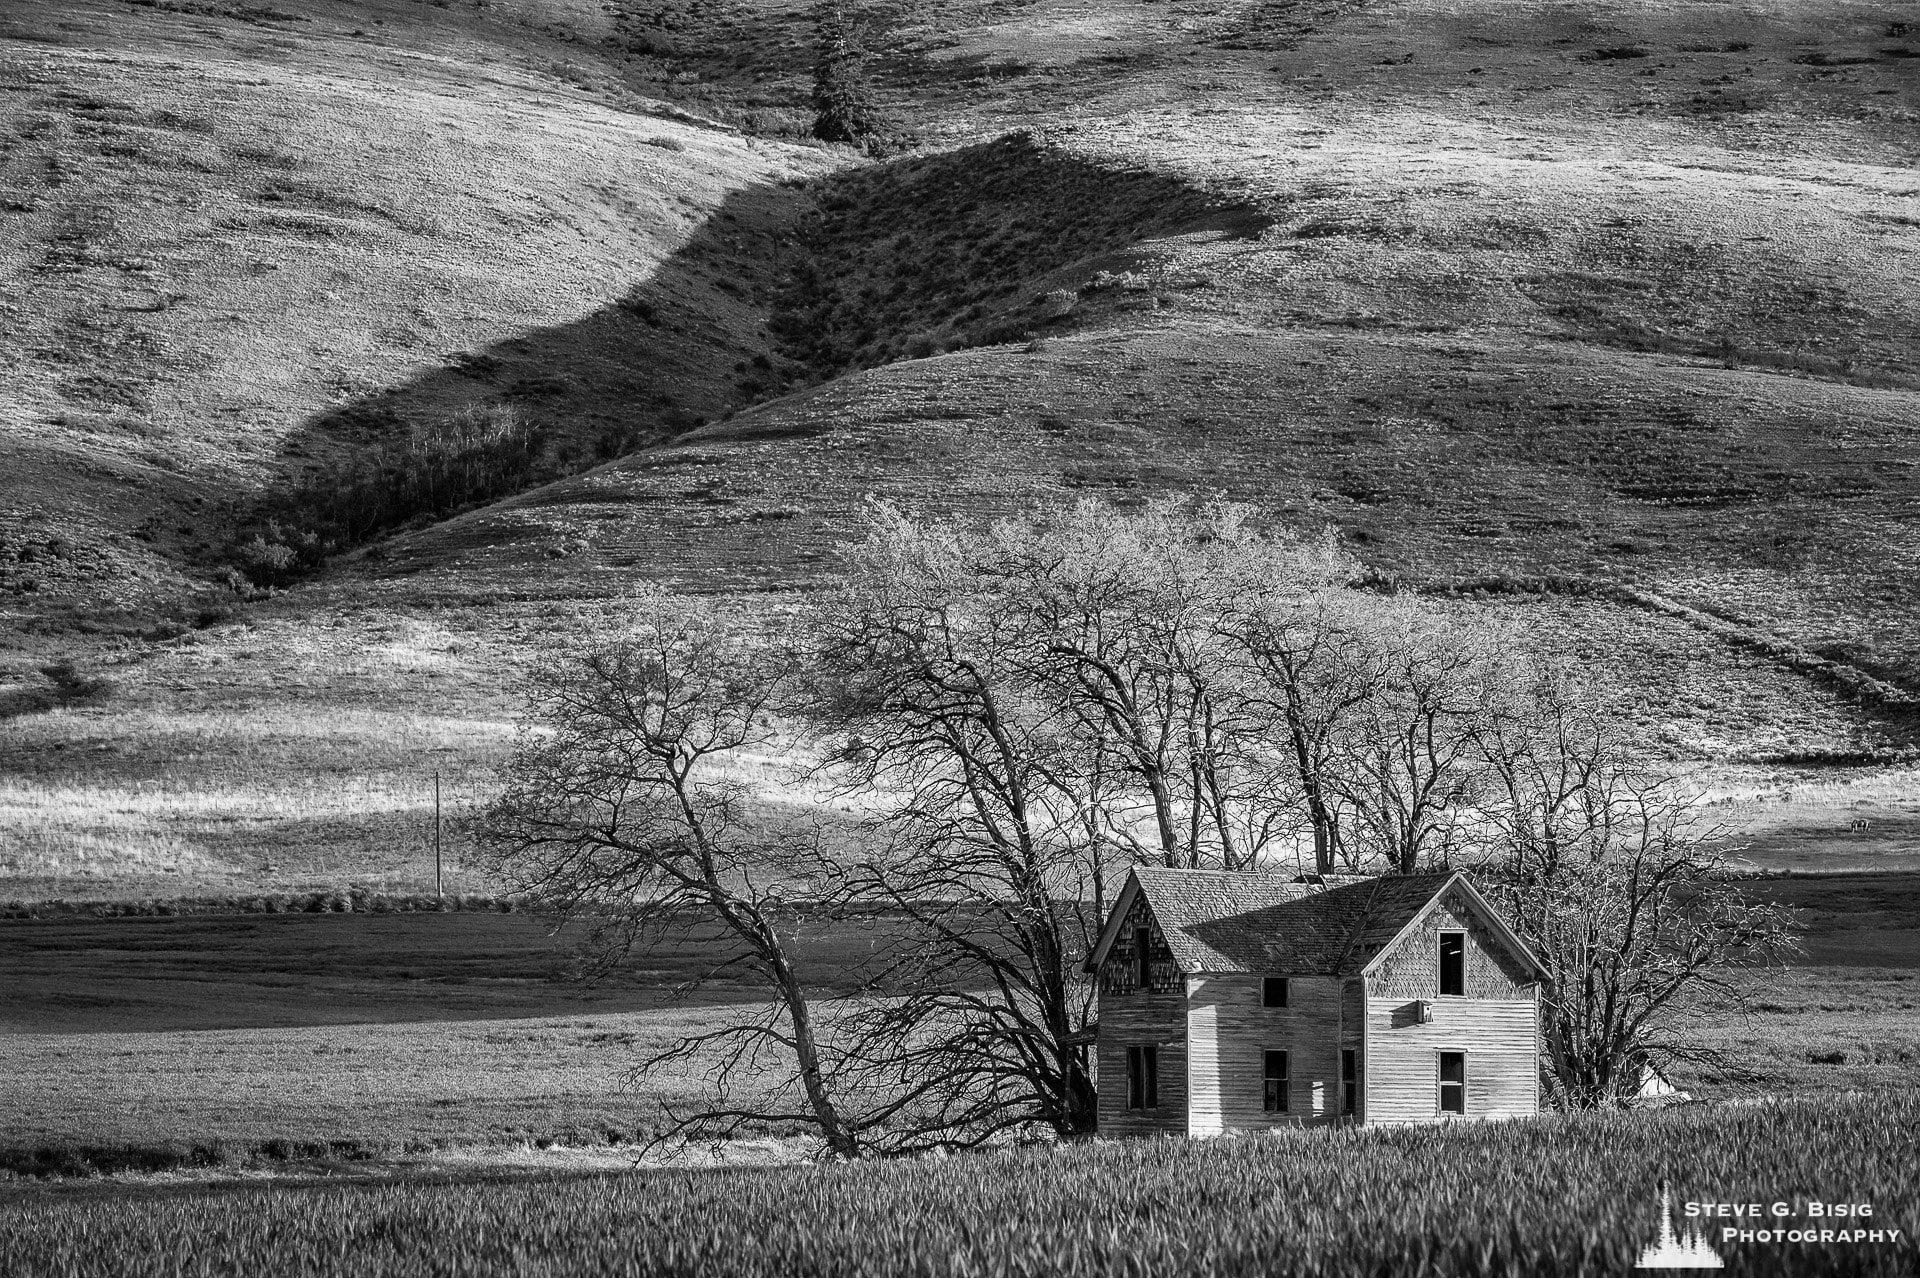 A black and white photograph of an old two-story farmhouse in rural Douglas County near Waterville, Washington.